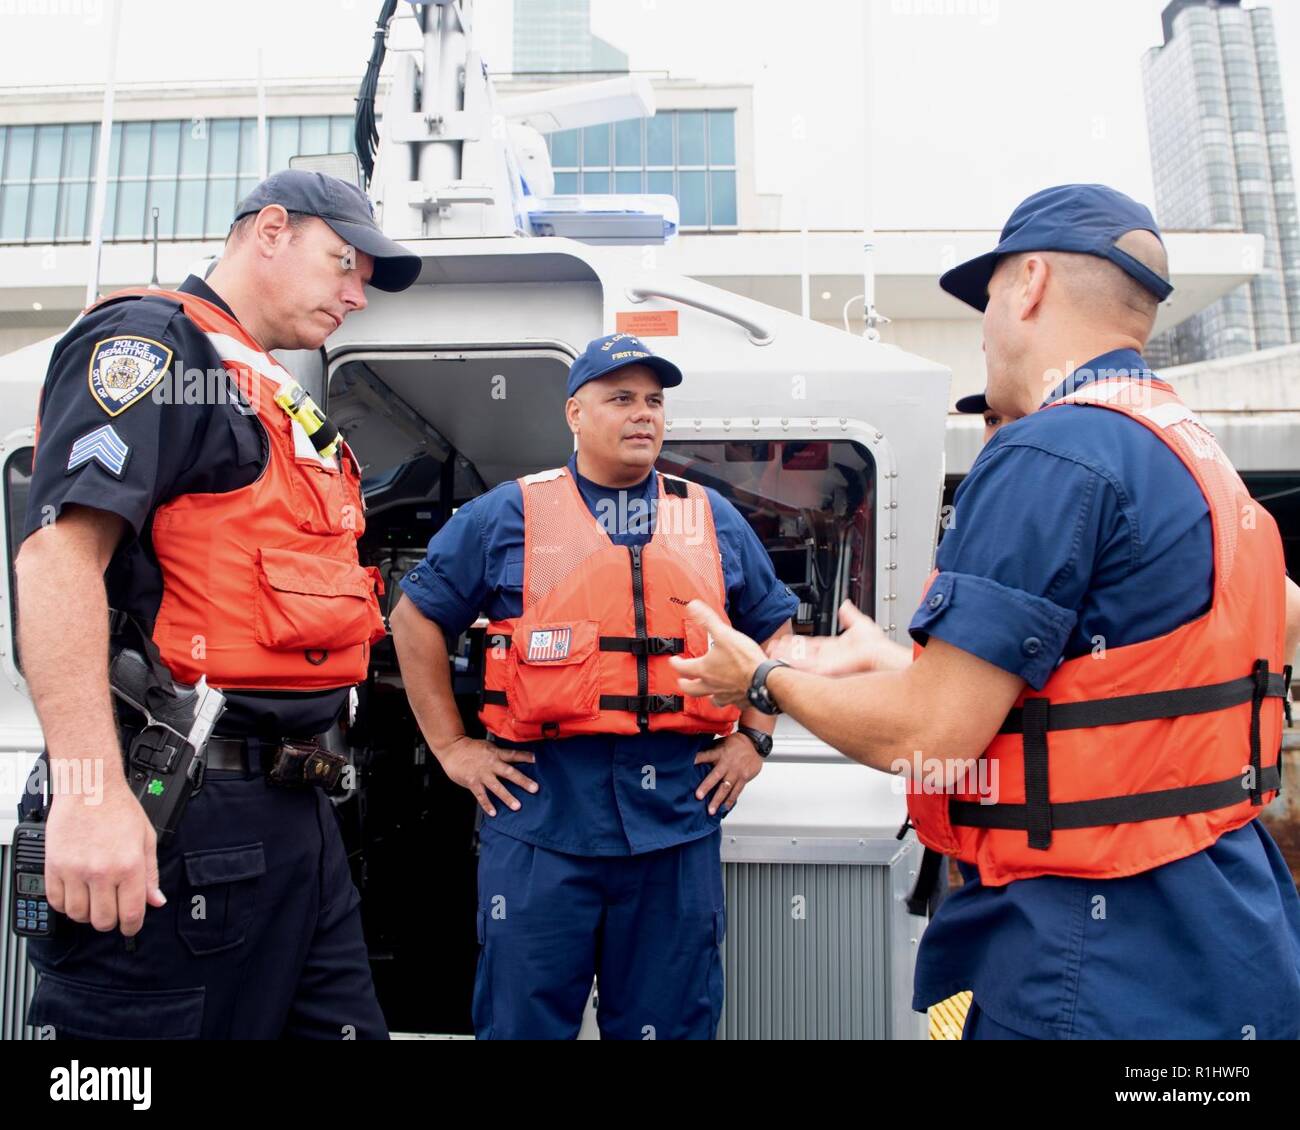 NEW YORK – Rear Adm. Andrew J. Tiongson, commander, First Coast Guard District (center) and Capt. Jason P. Tama, commander Coast Guard Sector New York (right), converse with a member of the New York City Police Department Harbor Unit on the East River during a mass casualty drill conducted outside the United Nations Building, Sept. 21, 2018. The Coast Guard along with multiple agencies, support maritime safety and security during the country’s largest National Special Security Event (NSSE). Stock Photo